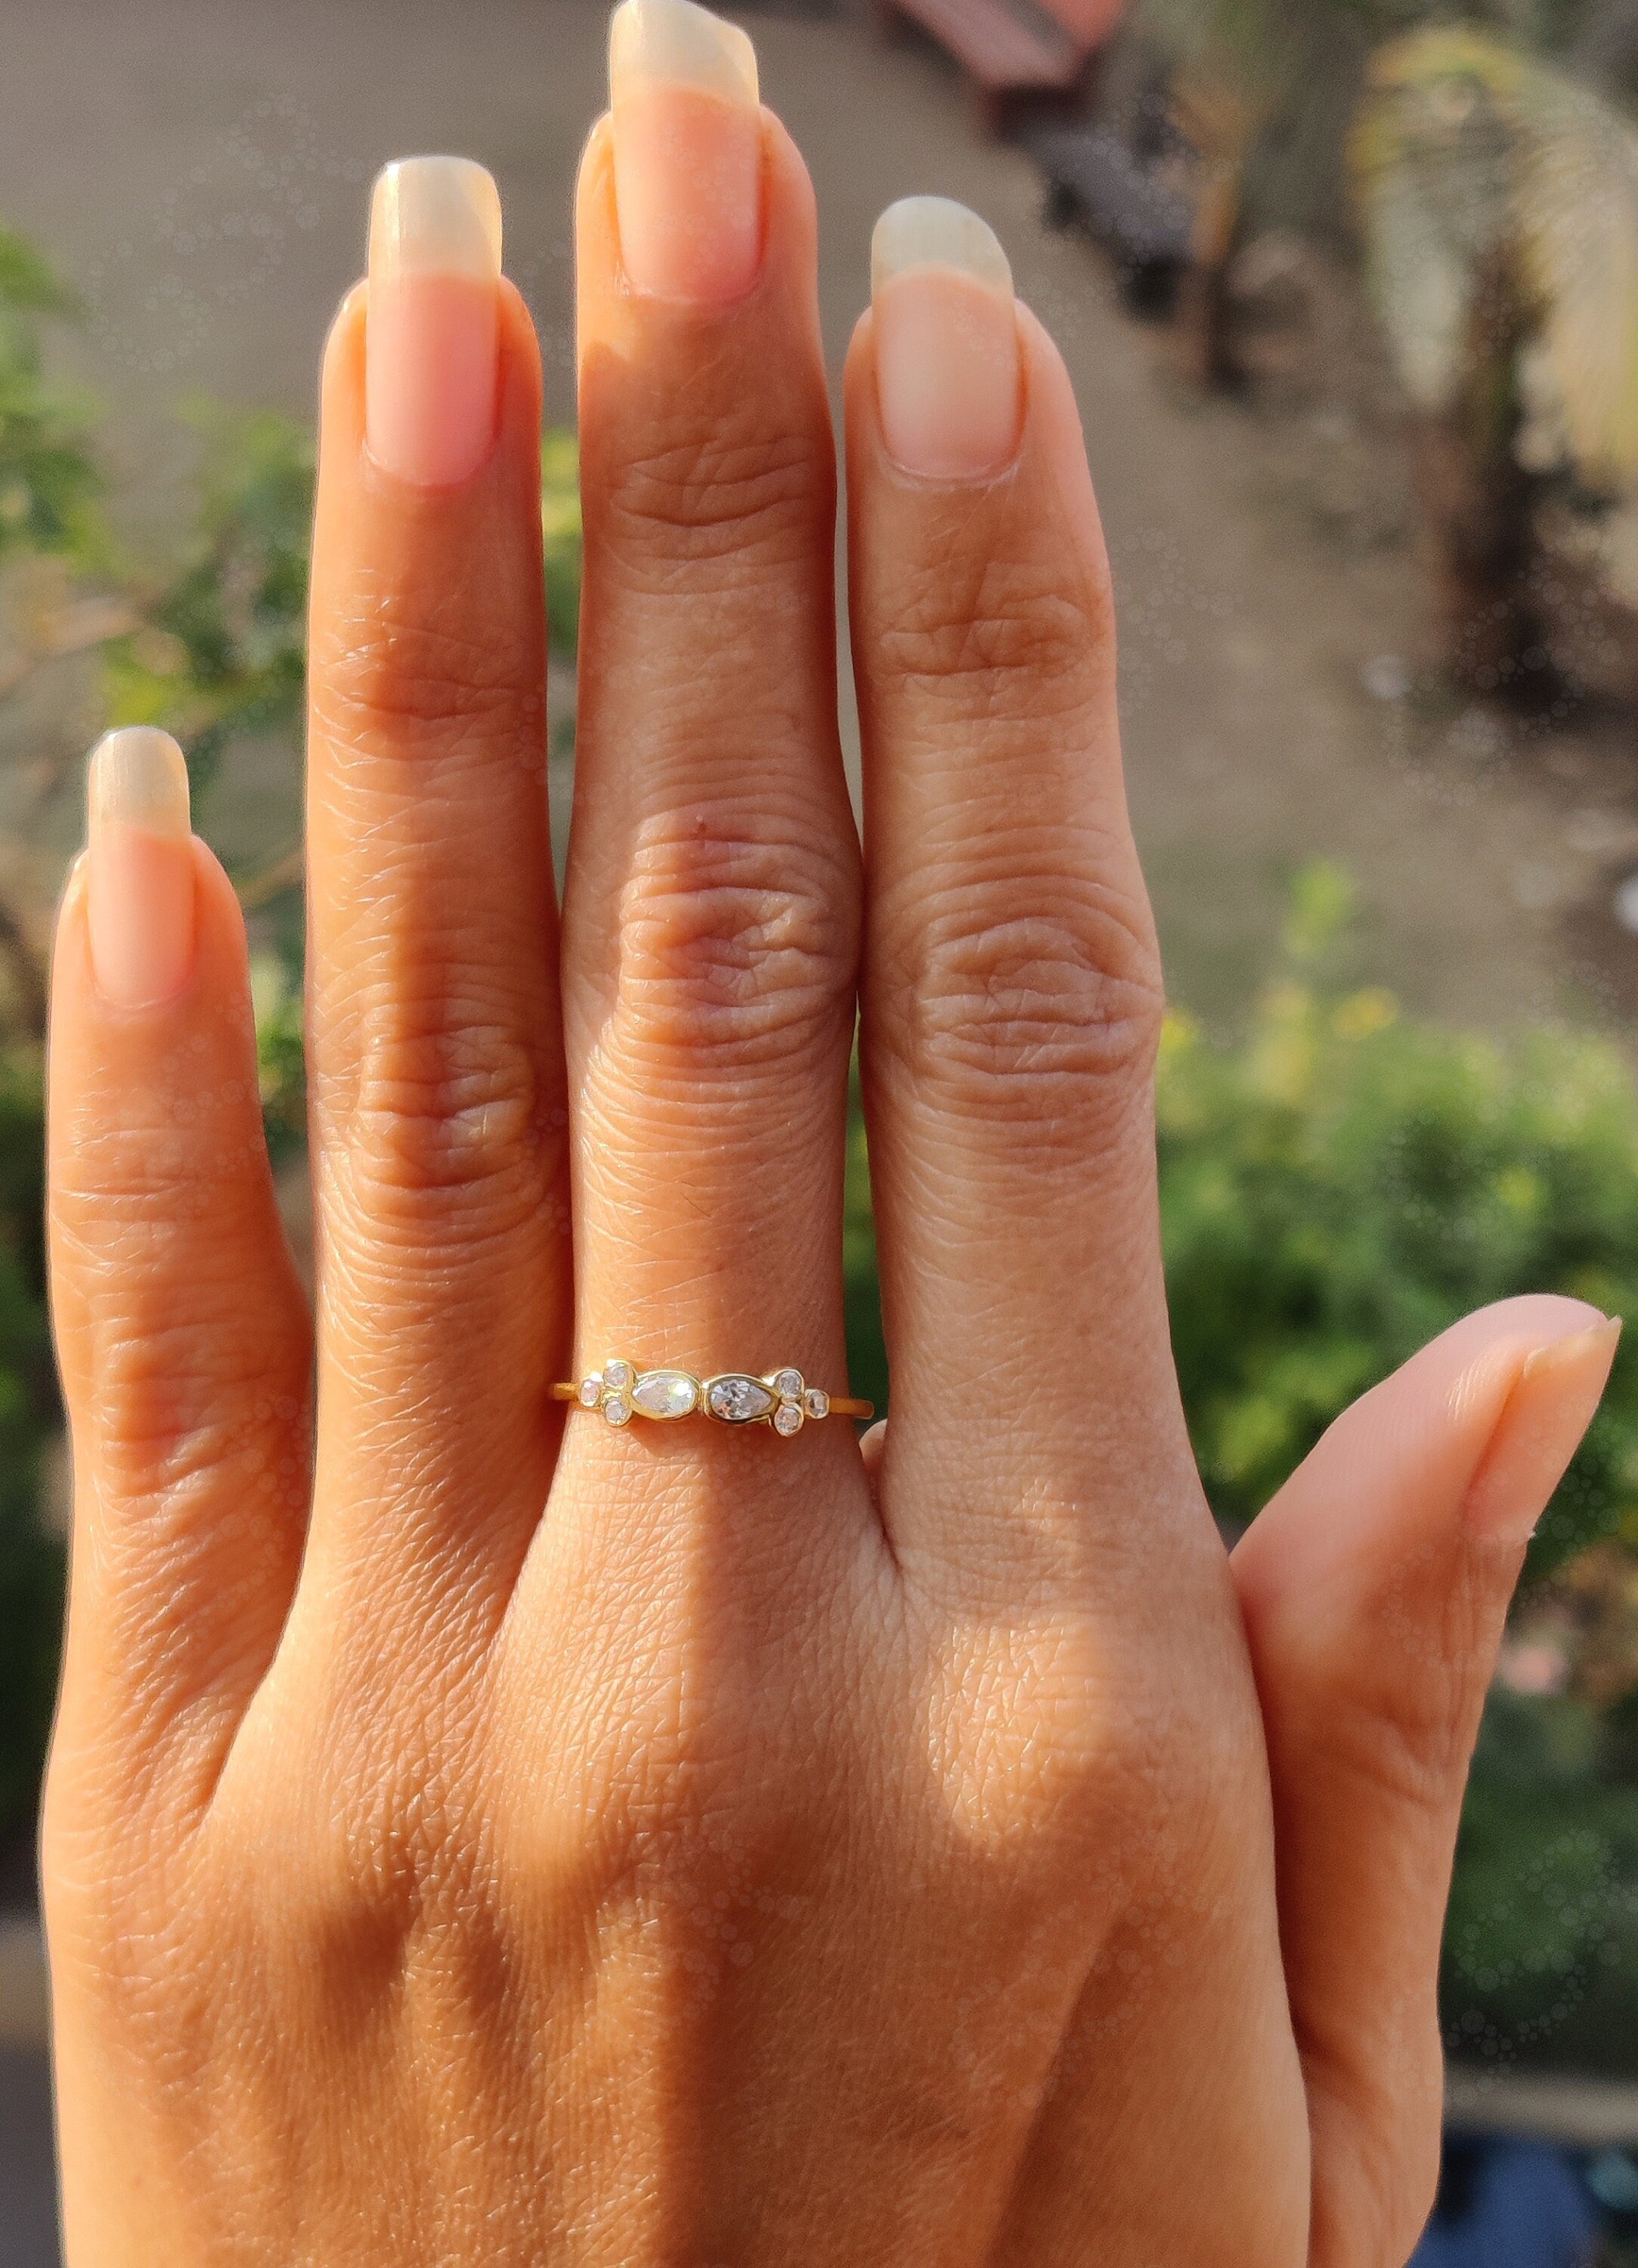 Harmony in Design: Dainty Silver and Gold Moissanite Cluster Ring - A Delicate Stackable Beauty, Perfect for Promise or Wedding Bands